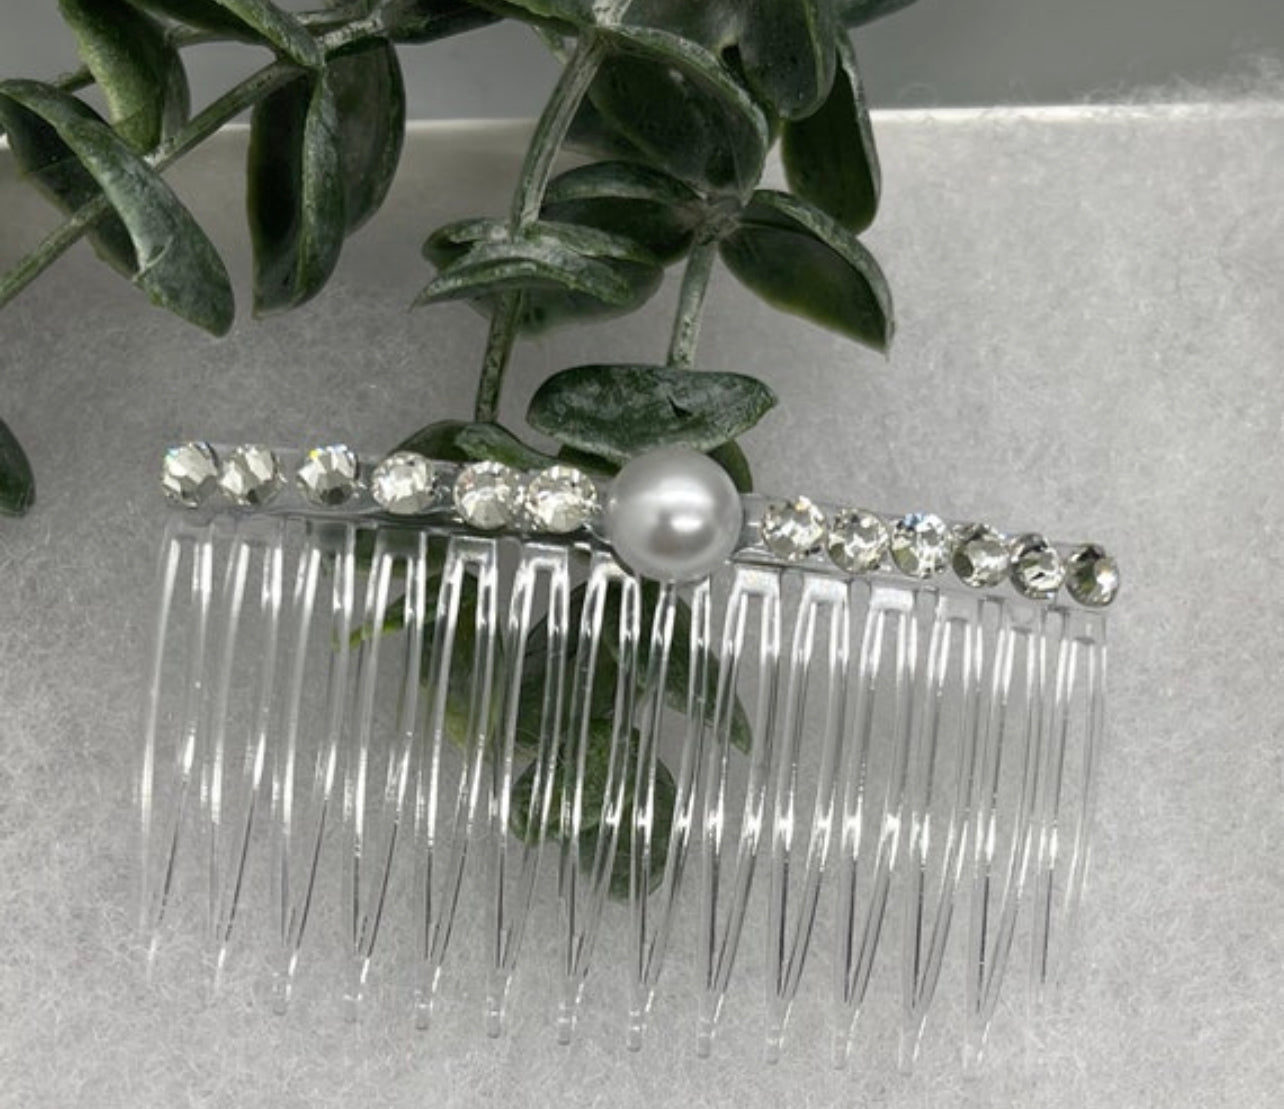 White bridal crystal Rhinestone Pearl hair comb accessory side Comb 3.5” clear plastic side Comb #006